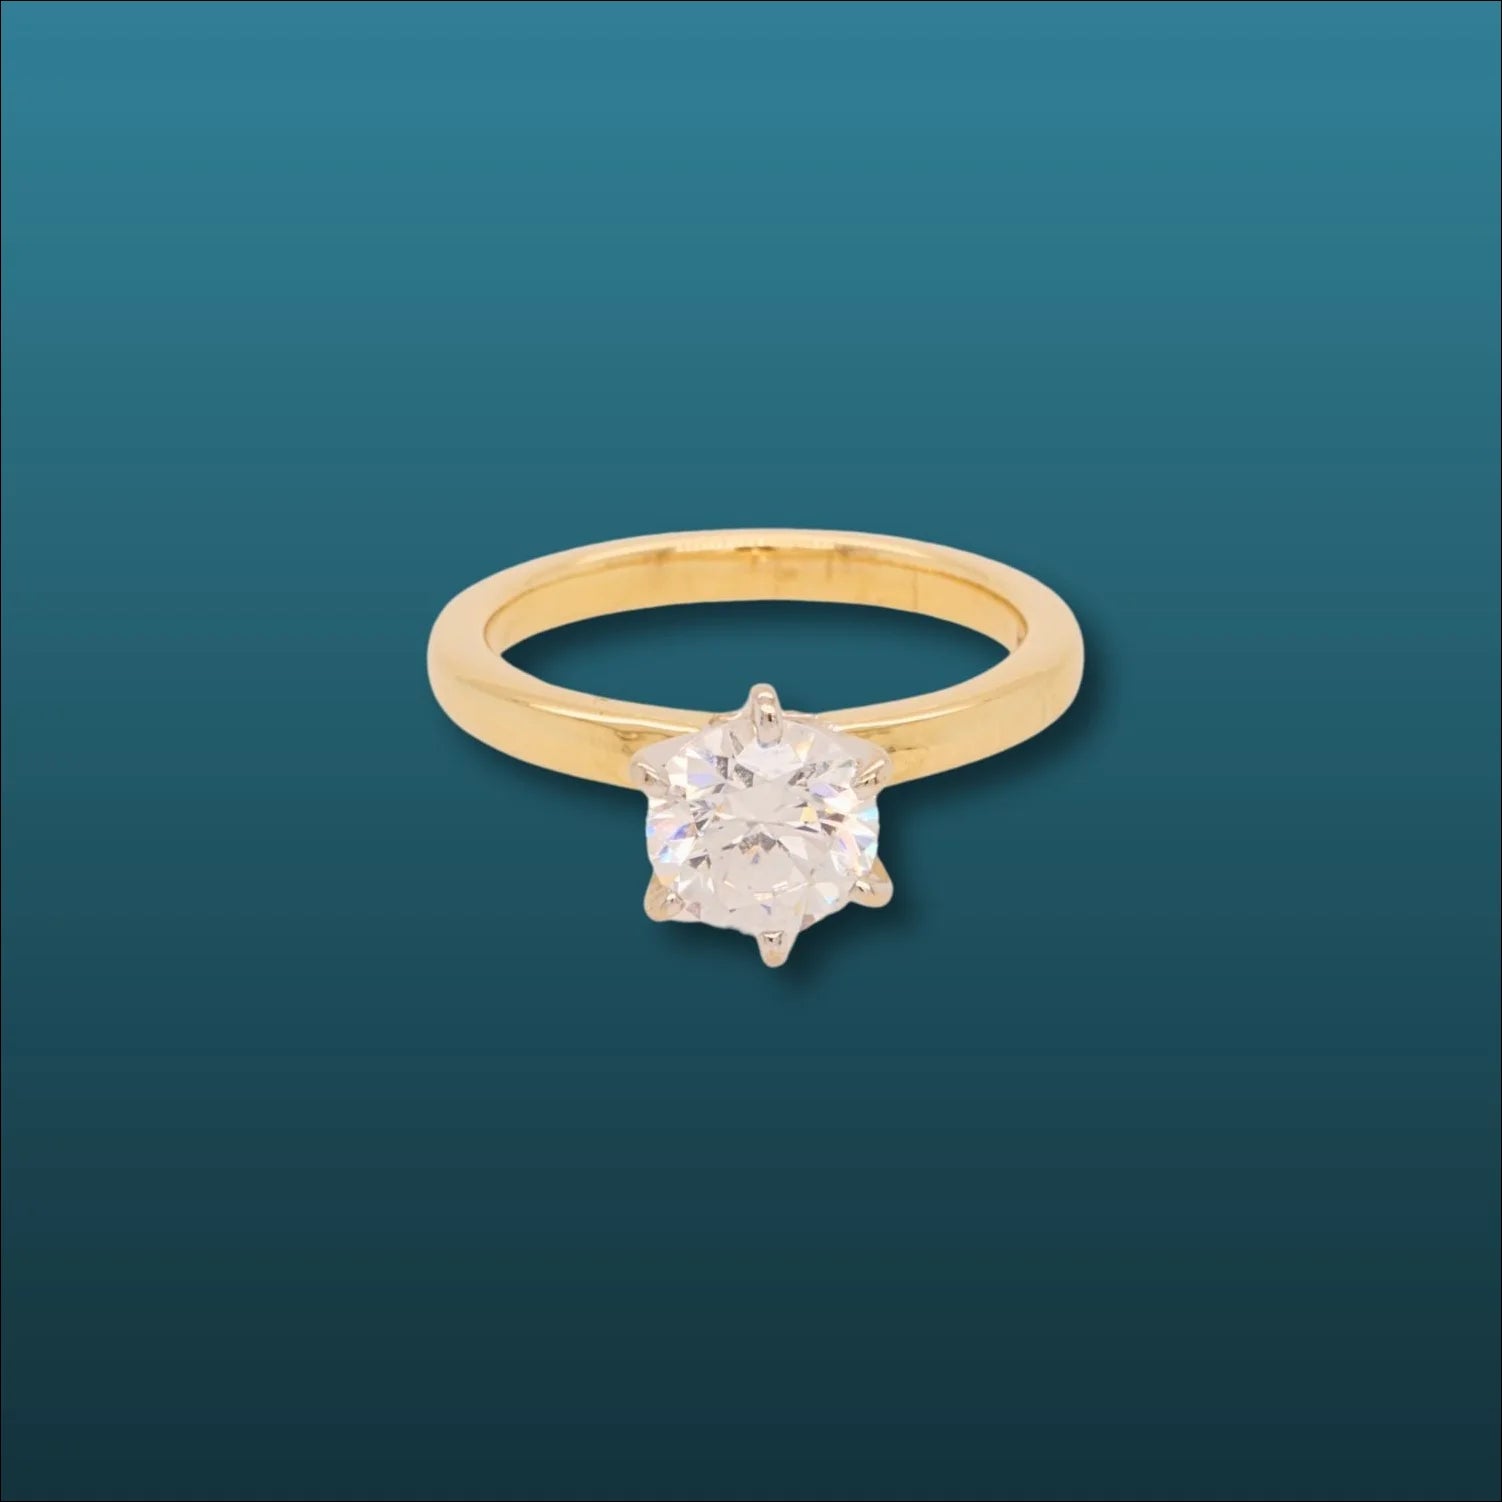 18k cz solitaire ring | Rings